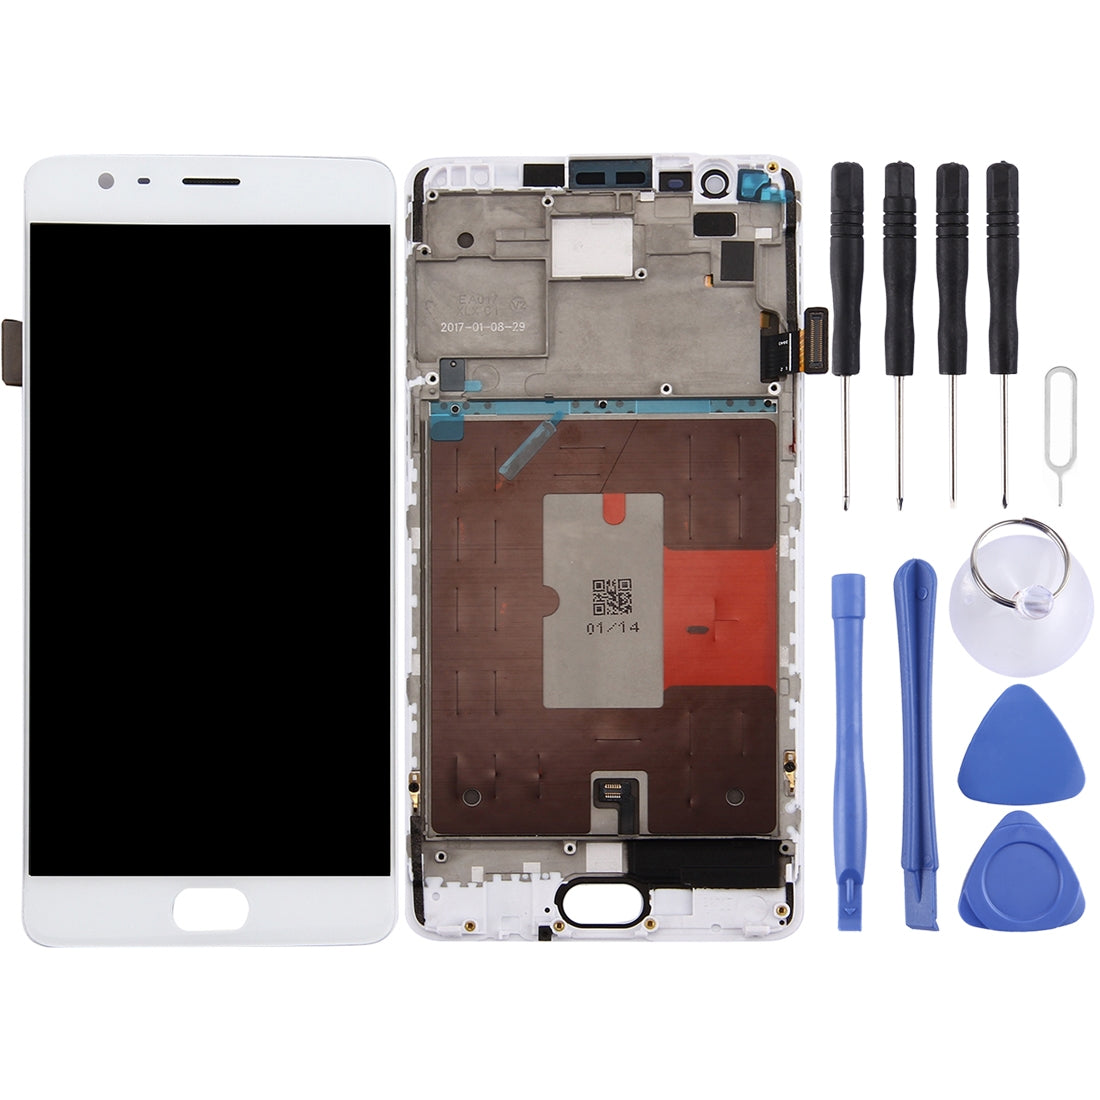 Pantalla Completa LCD + Tactil + Marco OnePlus 3T Blanco